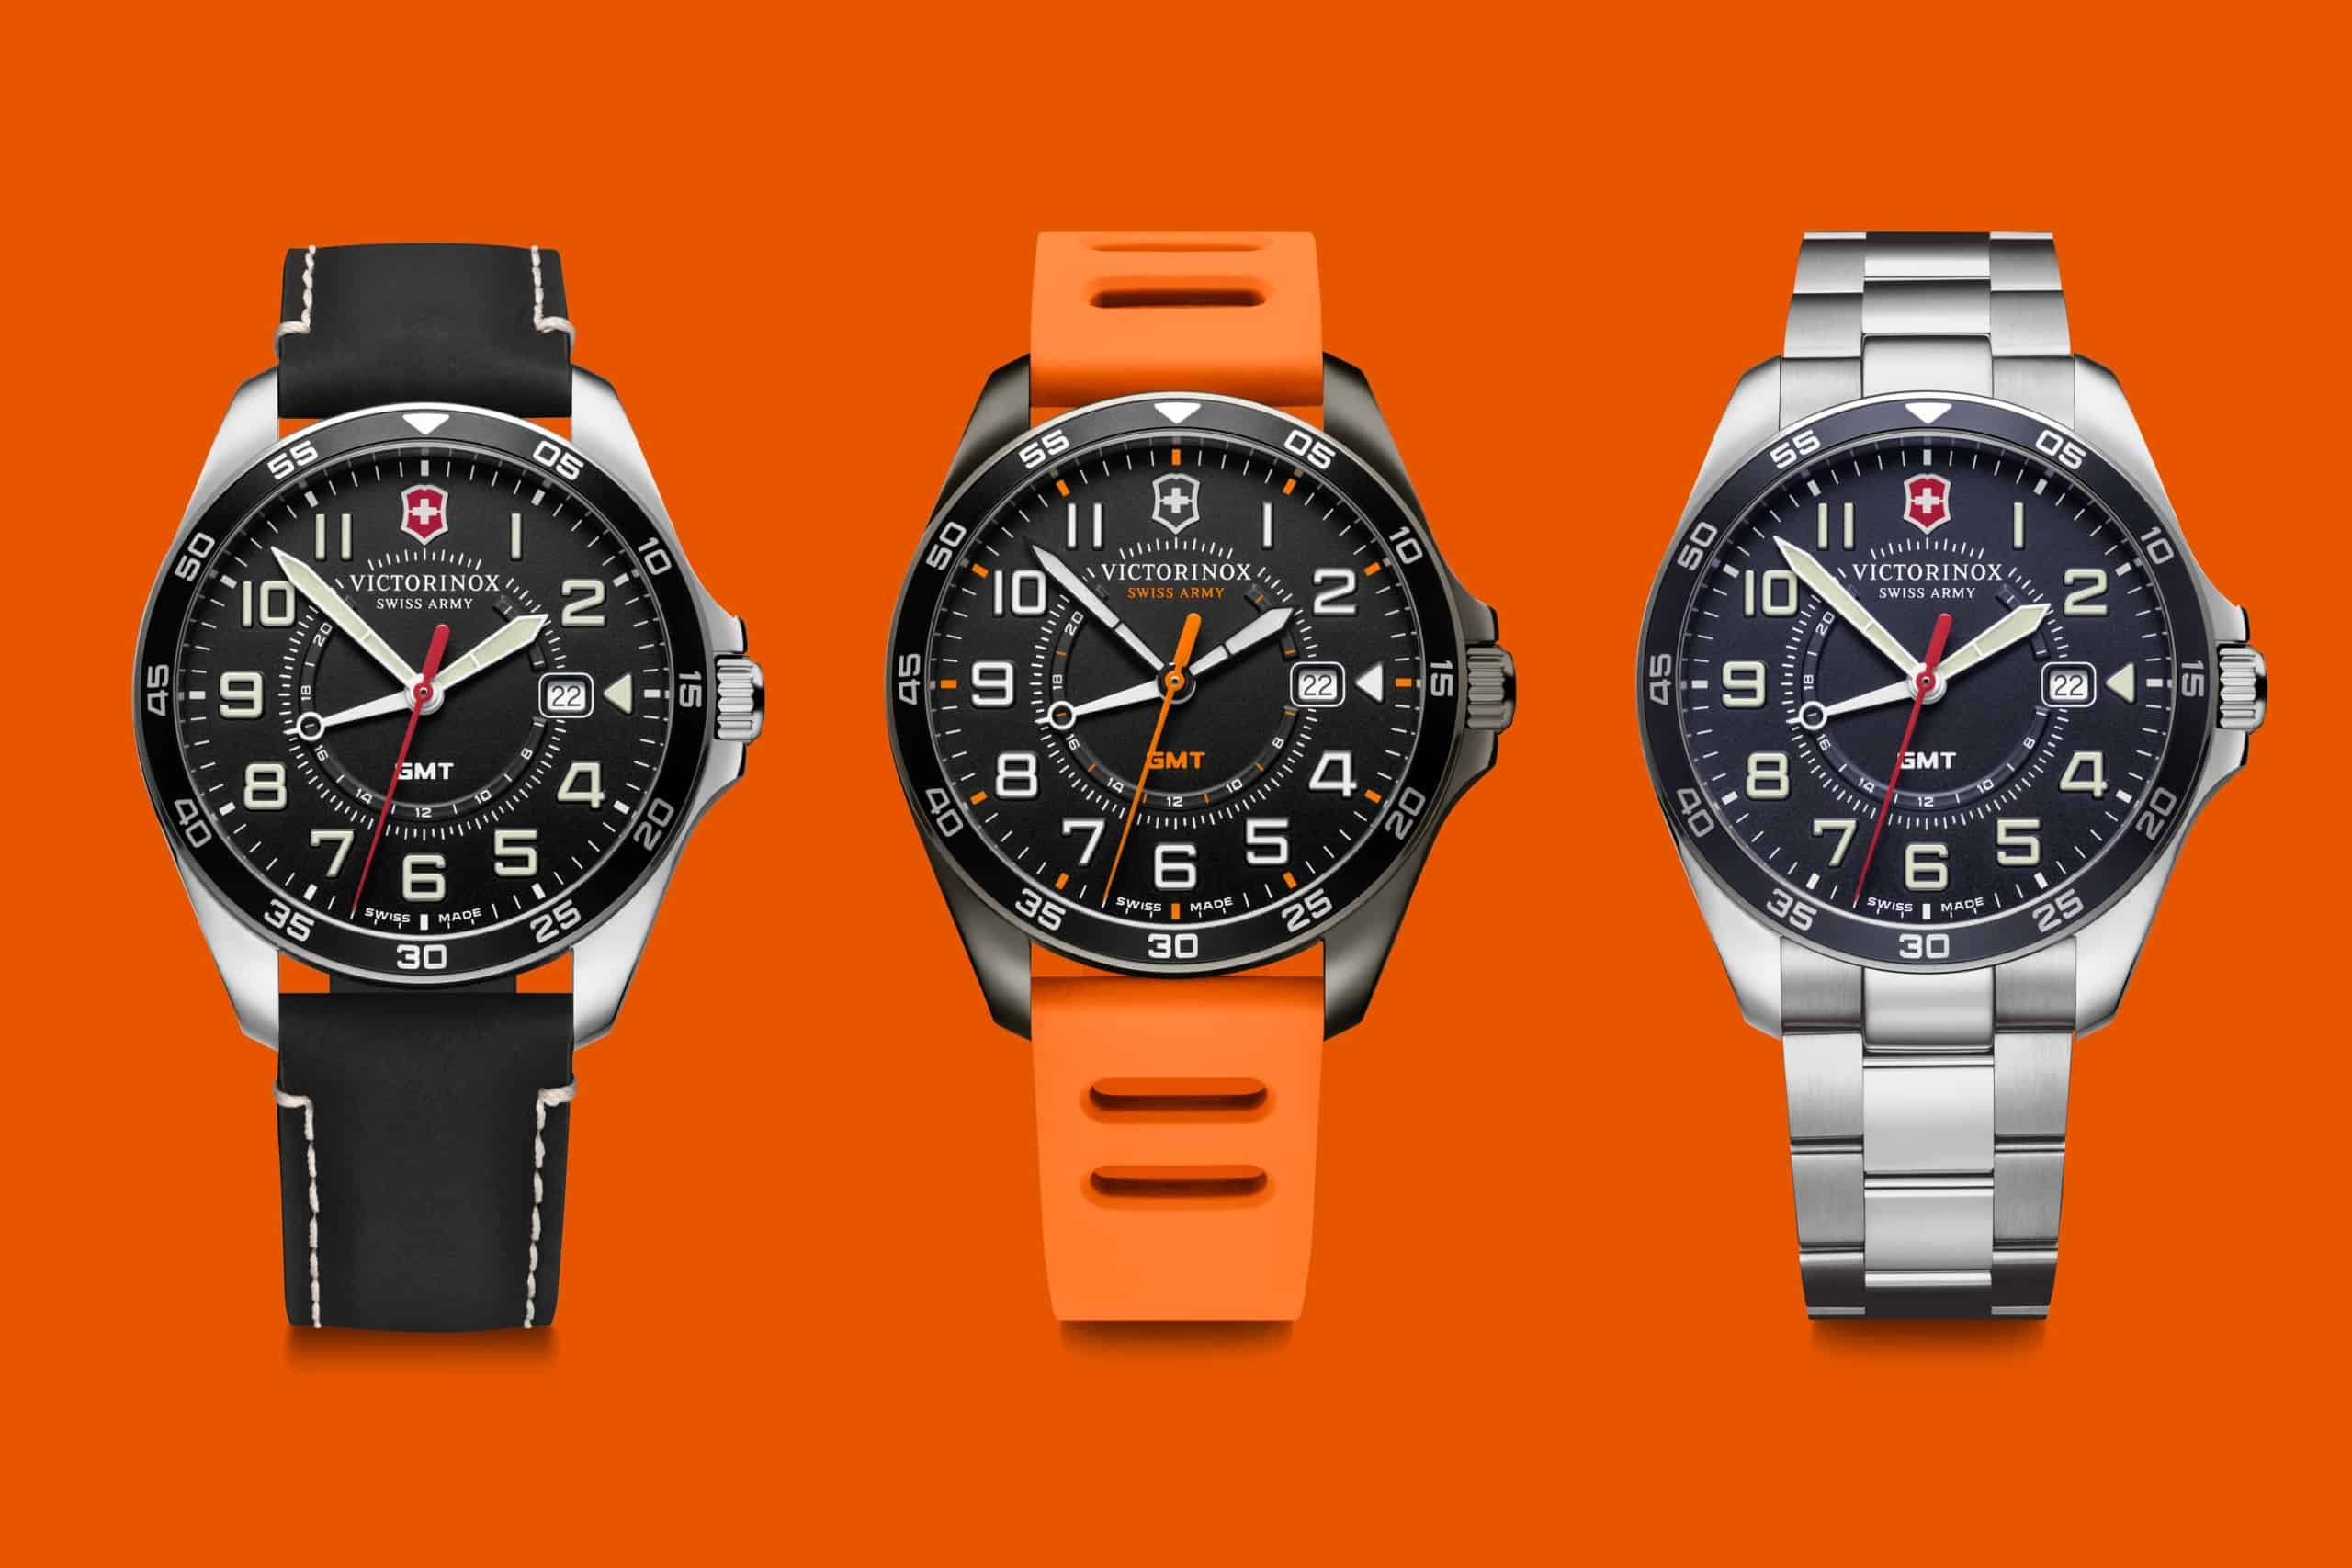 Victorinox Updates their FieldForce Line with a Series of Tough